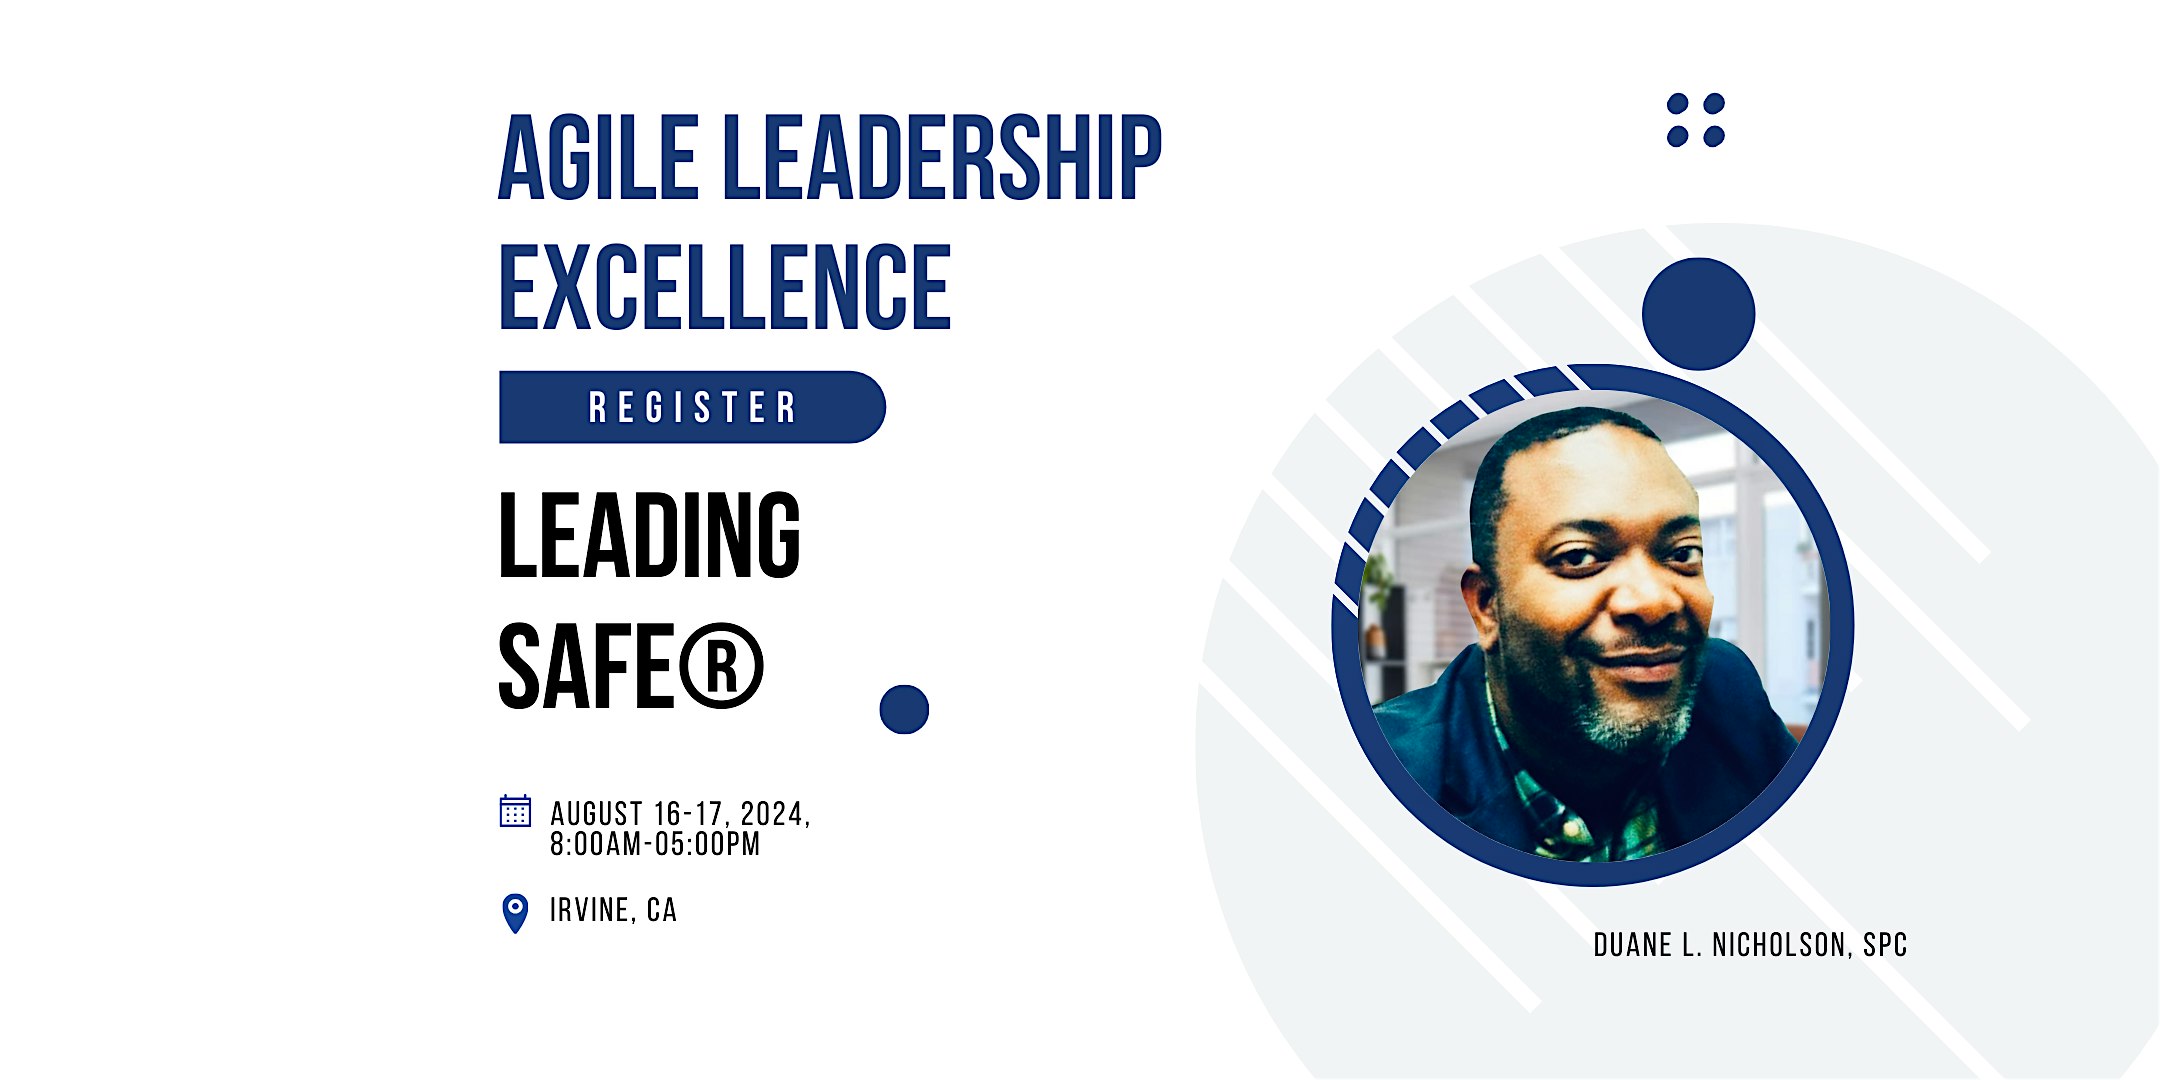 Agile Leadership Excellence with Leading SAFe